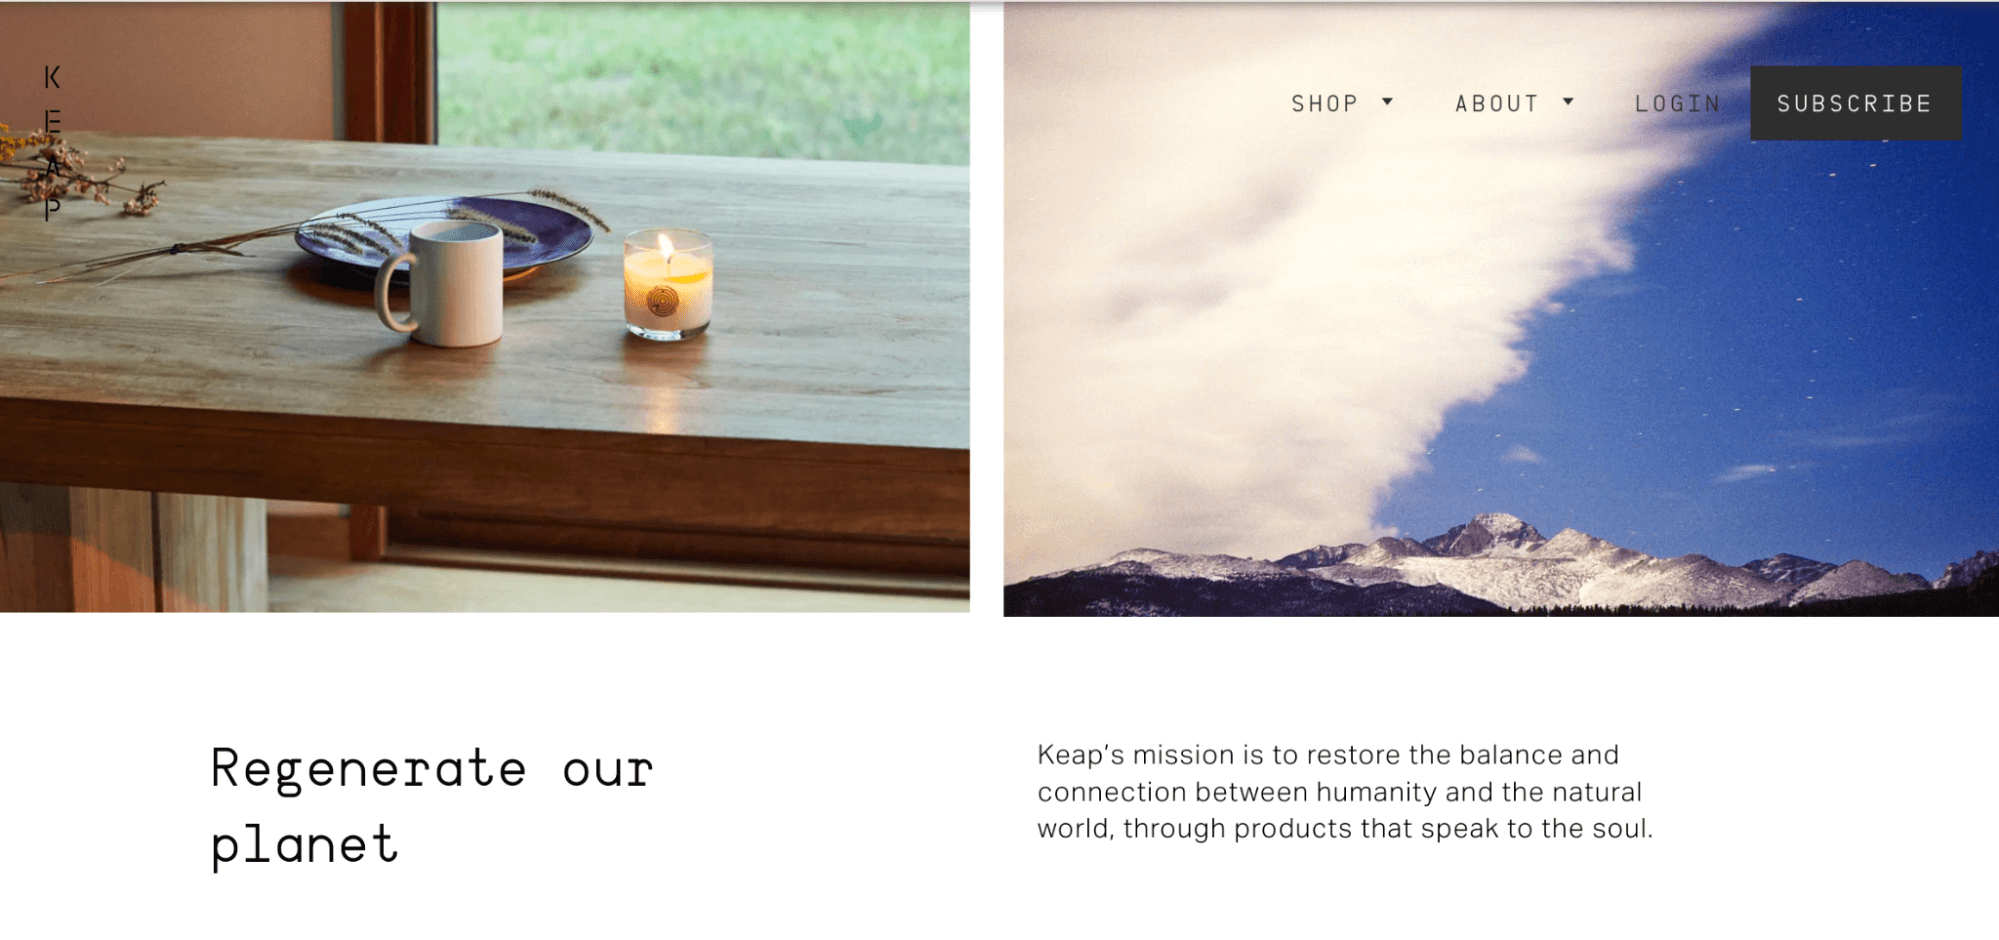 Keap Candles’ mission is to restore the balance and connection between humanity and hte natural world, through products that speak to the soul. 